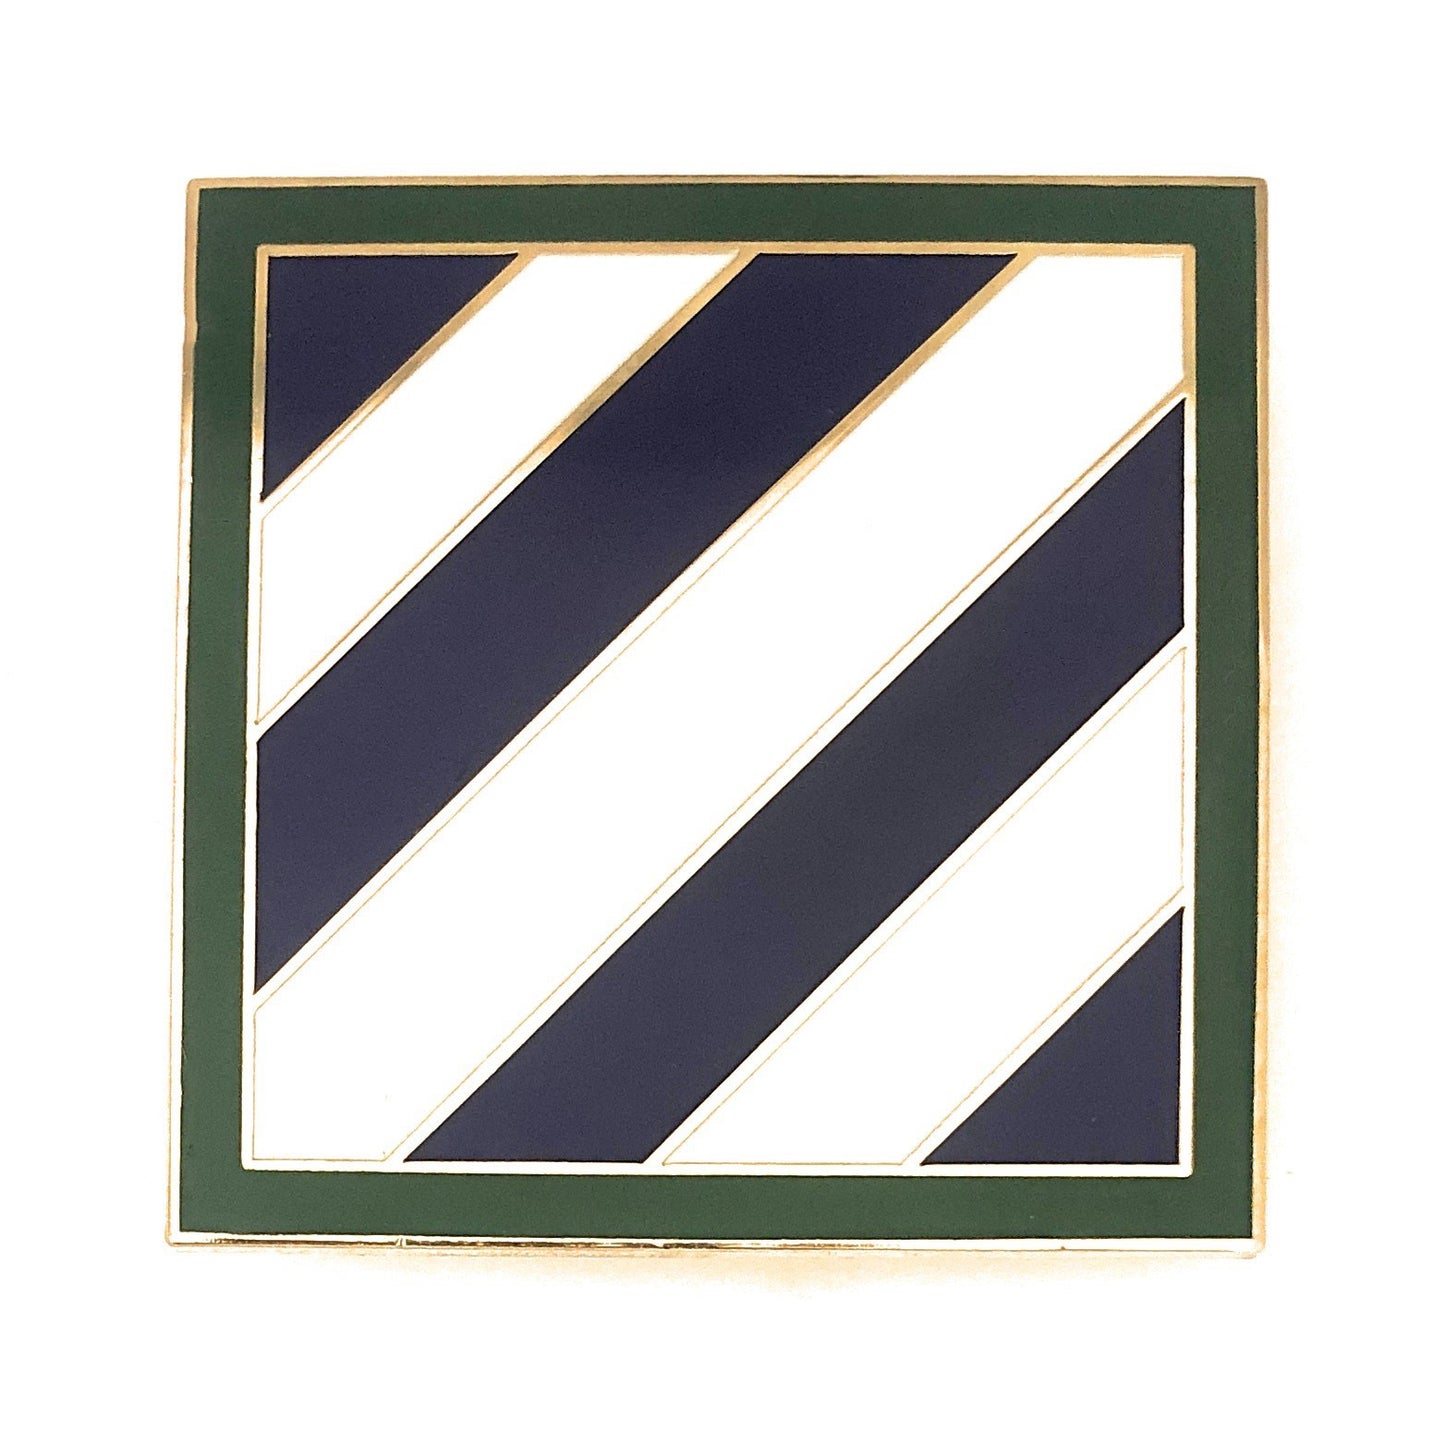 U.S. Army 3rd Infantry Division Pin with Gold Plated Border (Large Pin 2”X 2”) (each)